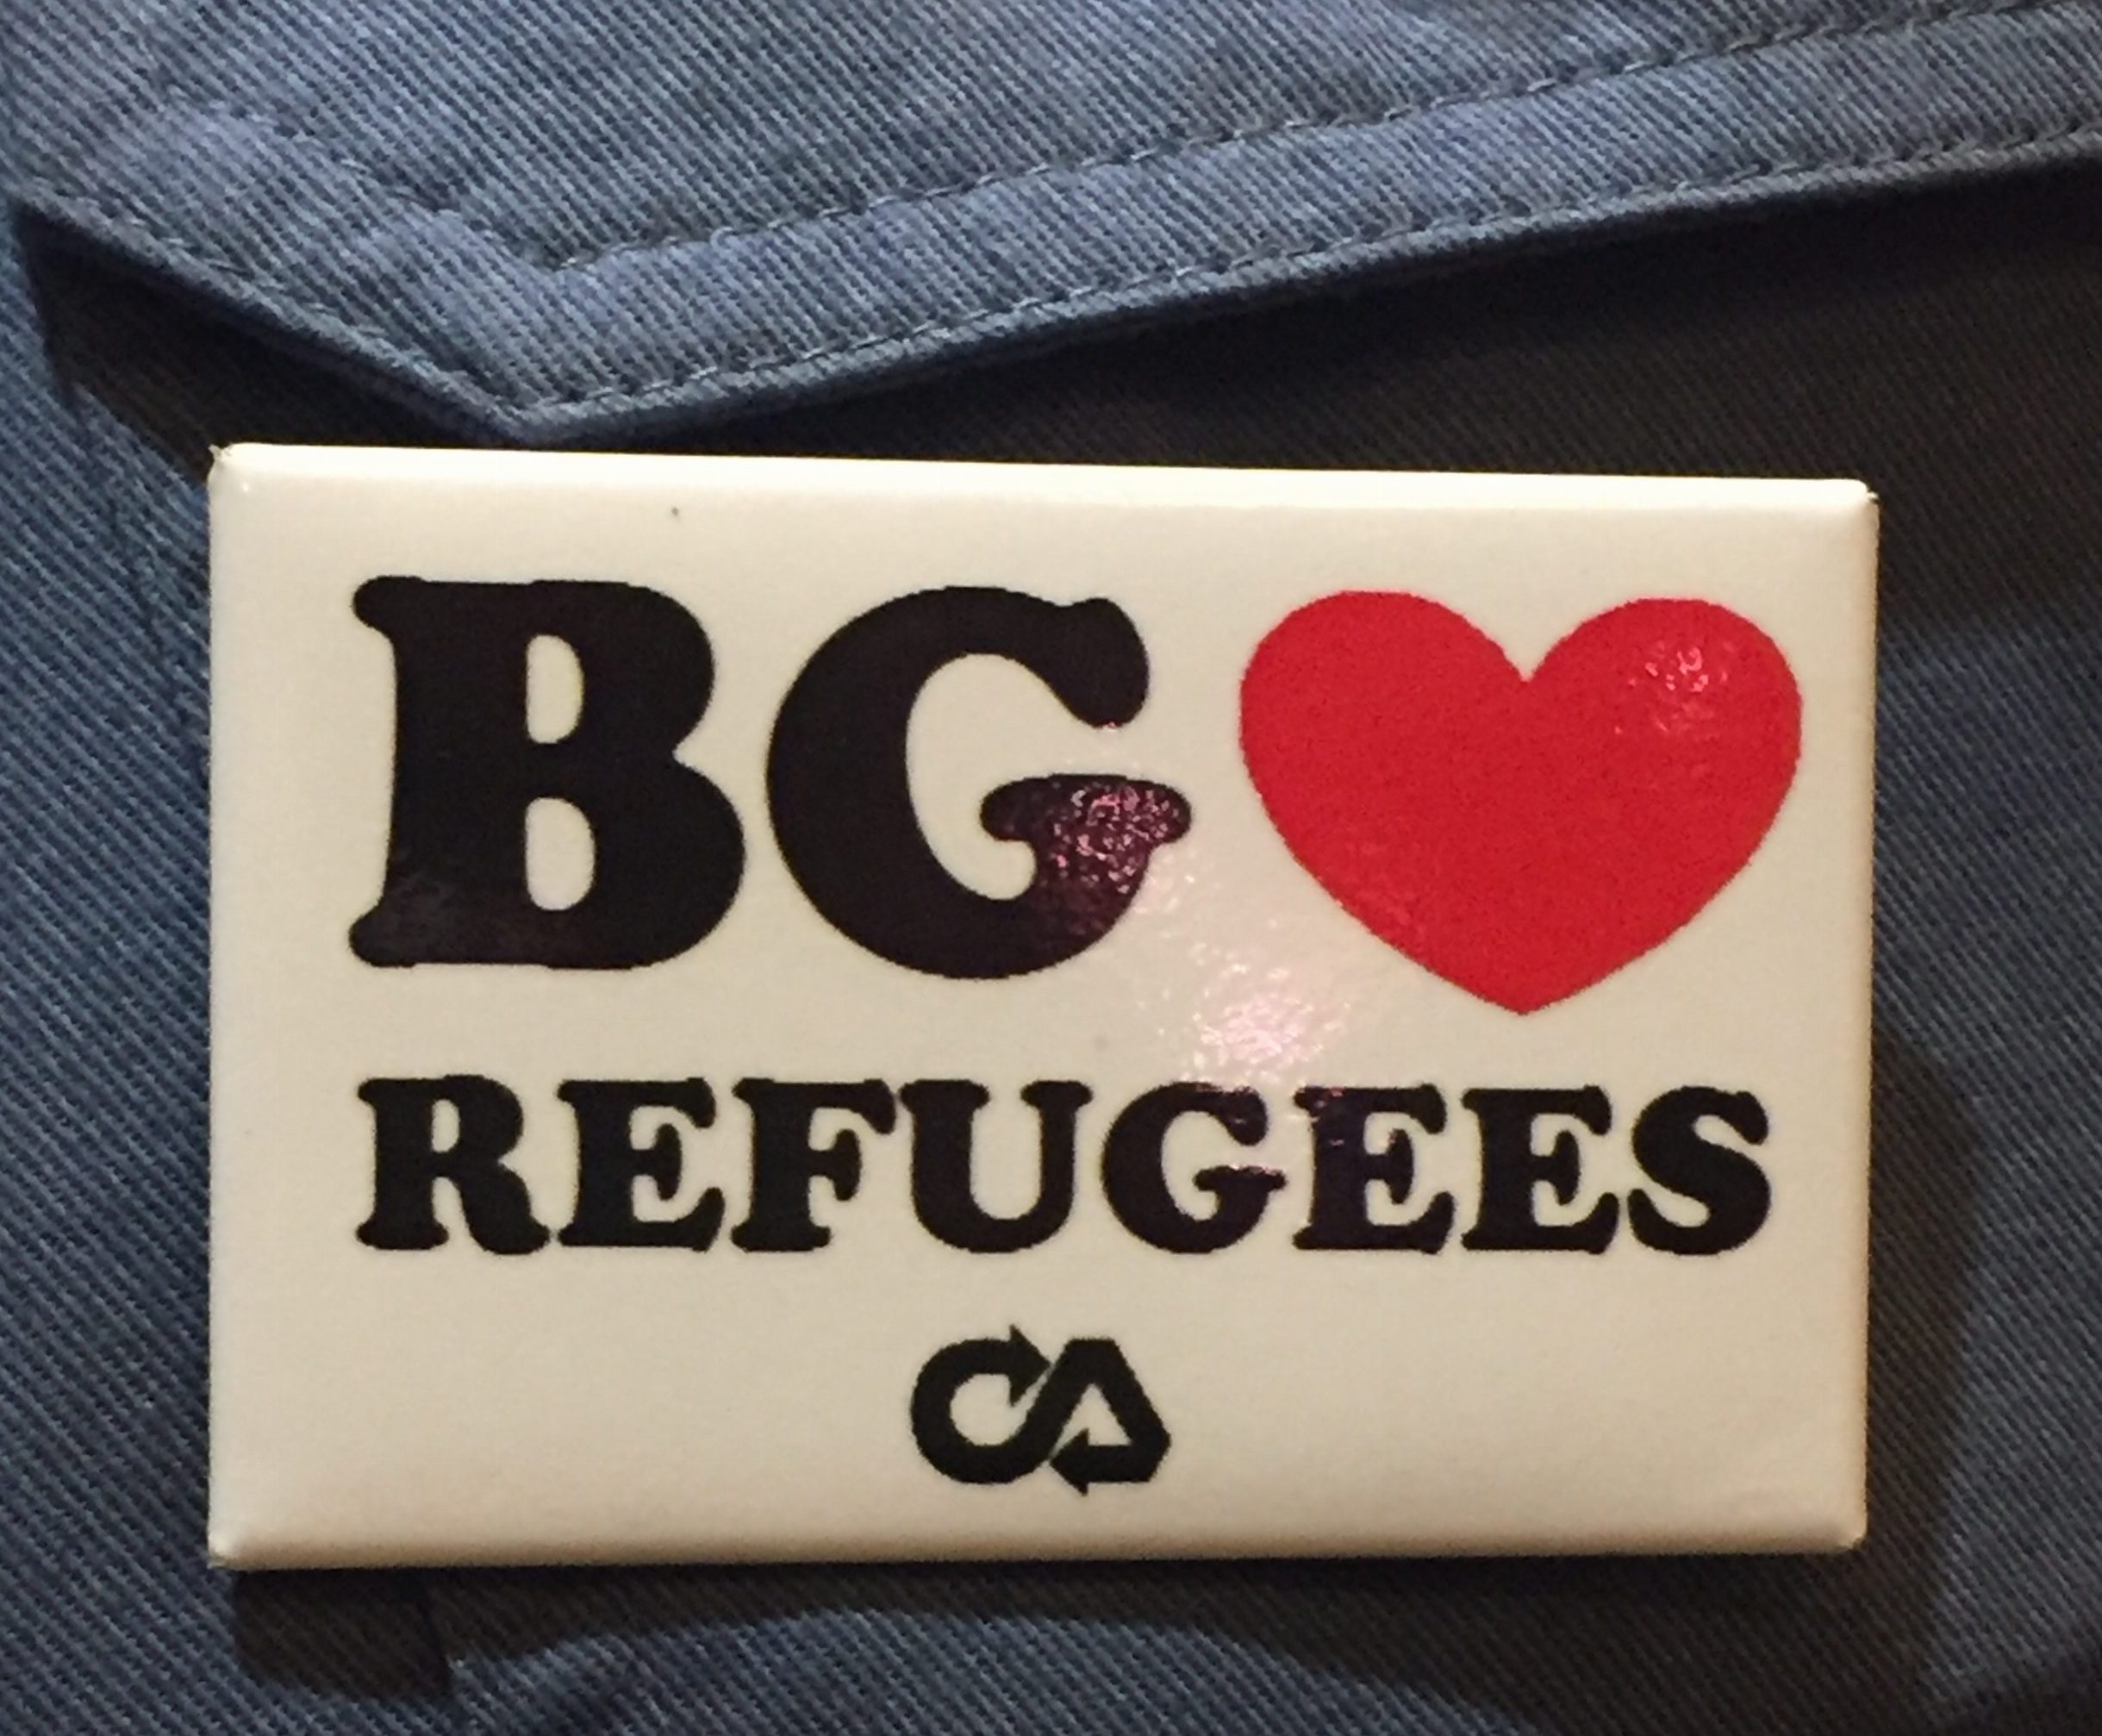 Bowling Green, pop. 61,400, has helped to resettle some 10,000 refugees in the past 35 years. 